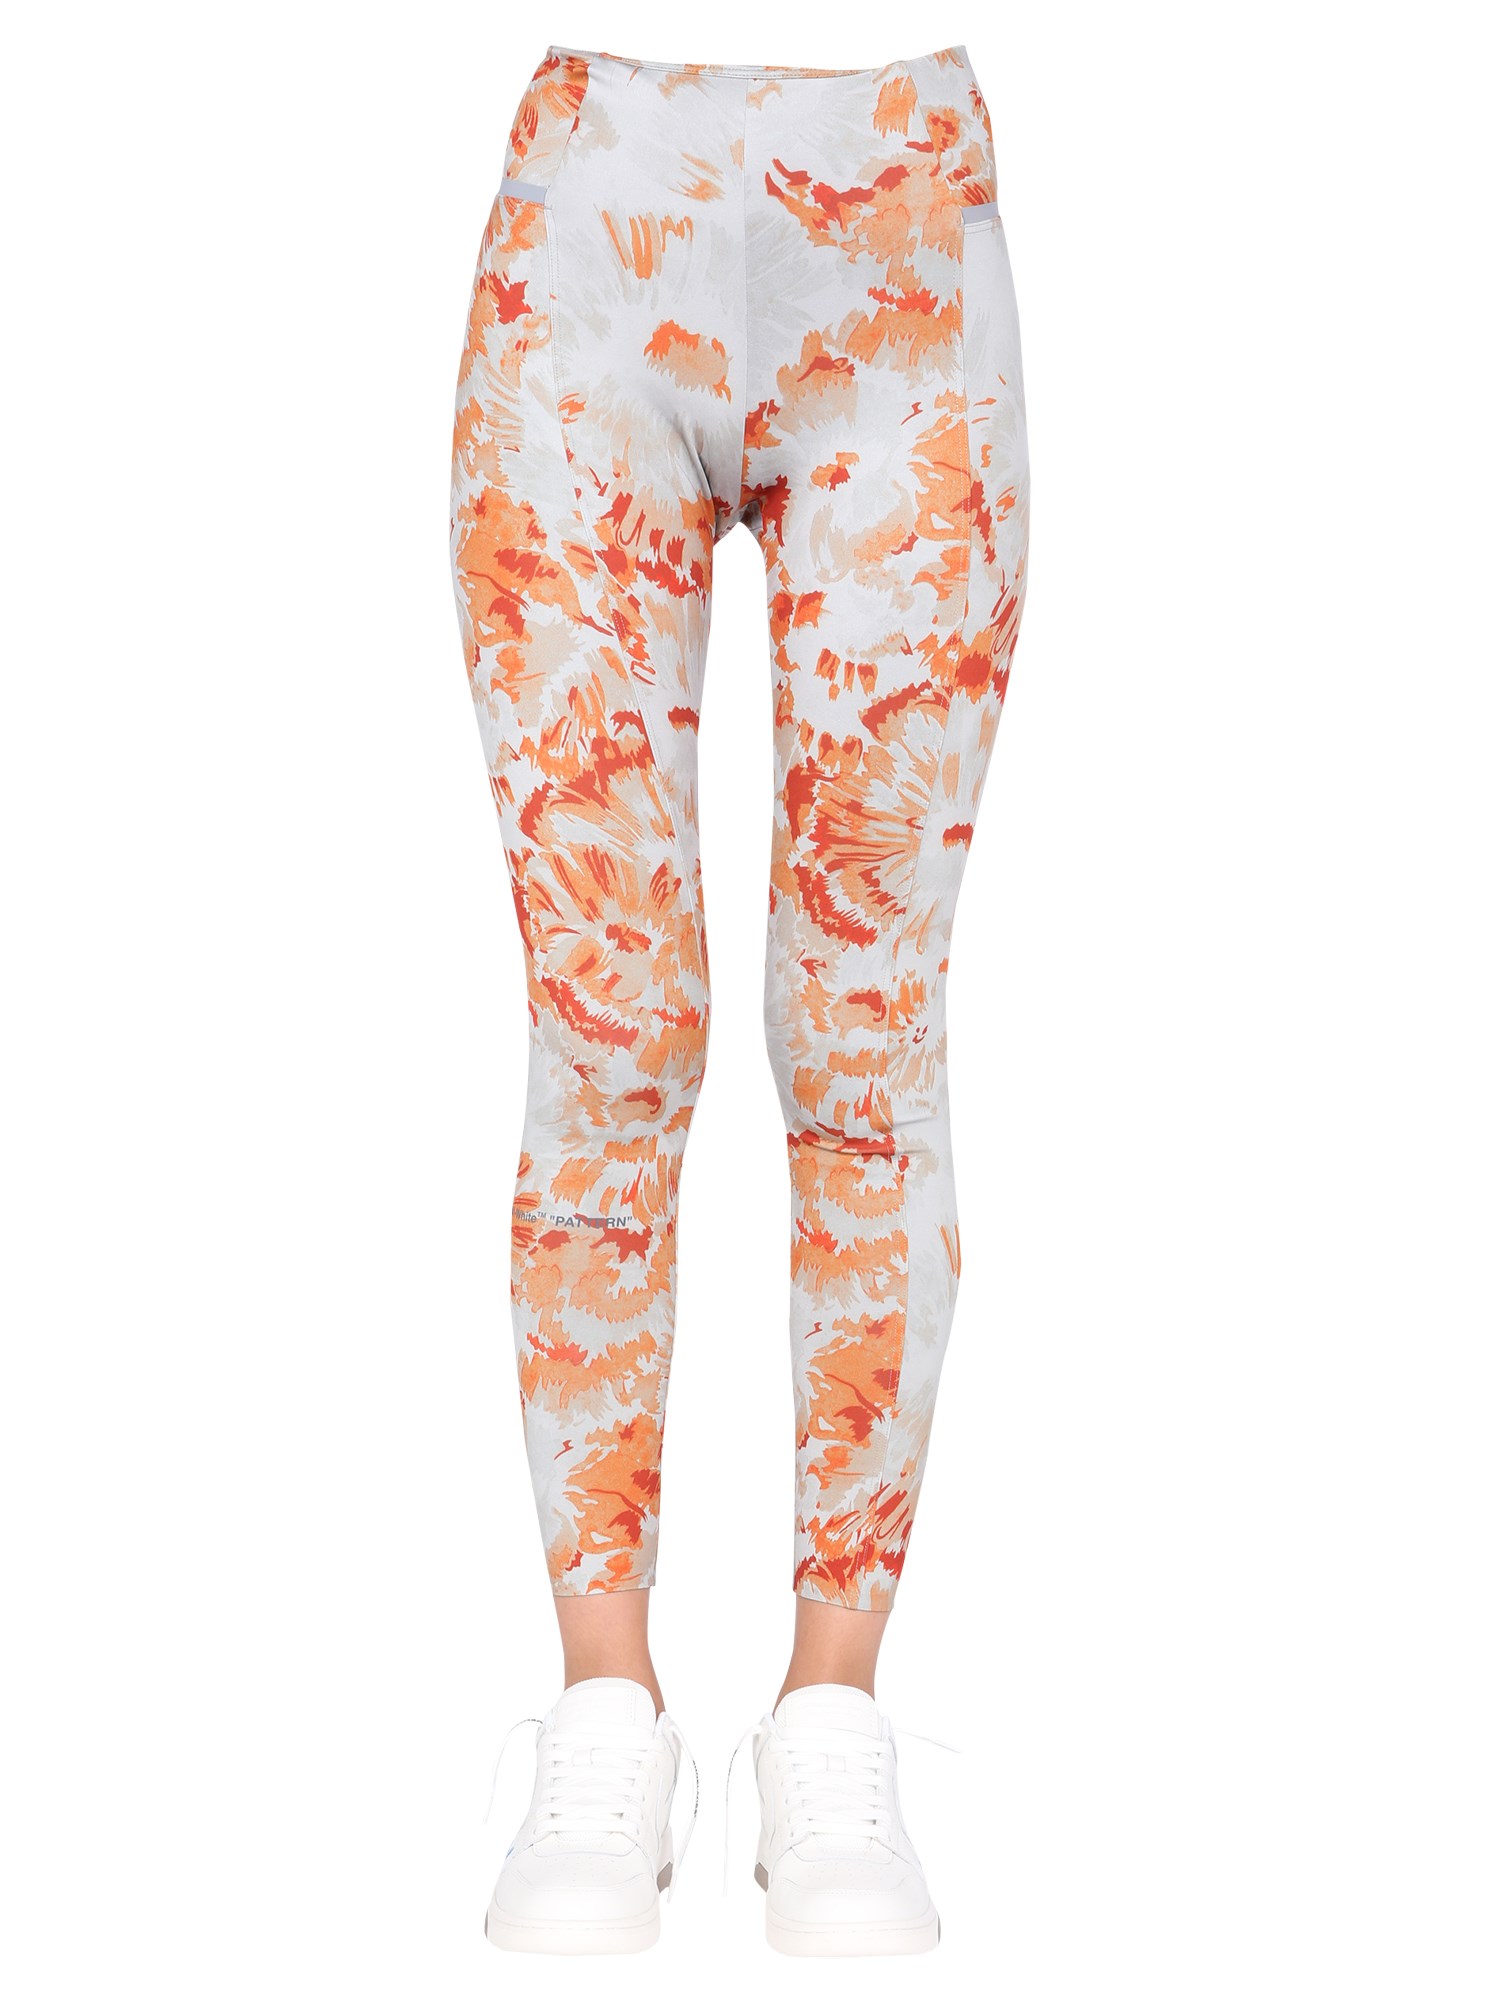 off-white leggings with chine flowers motif